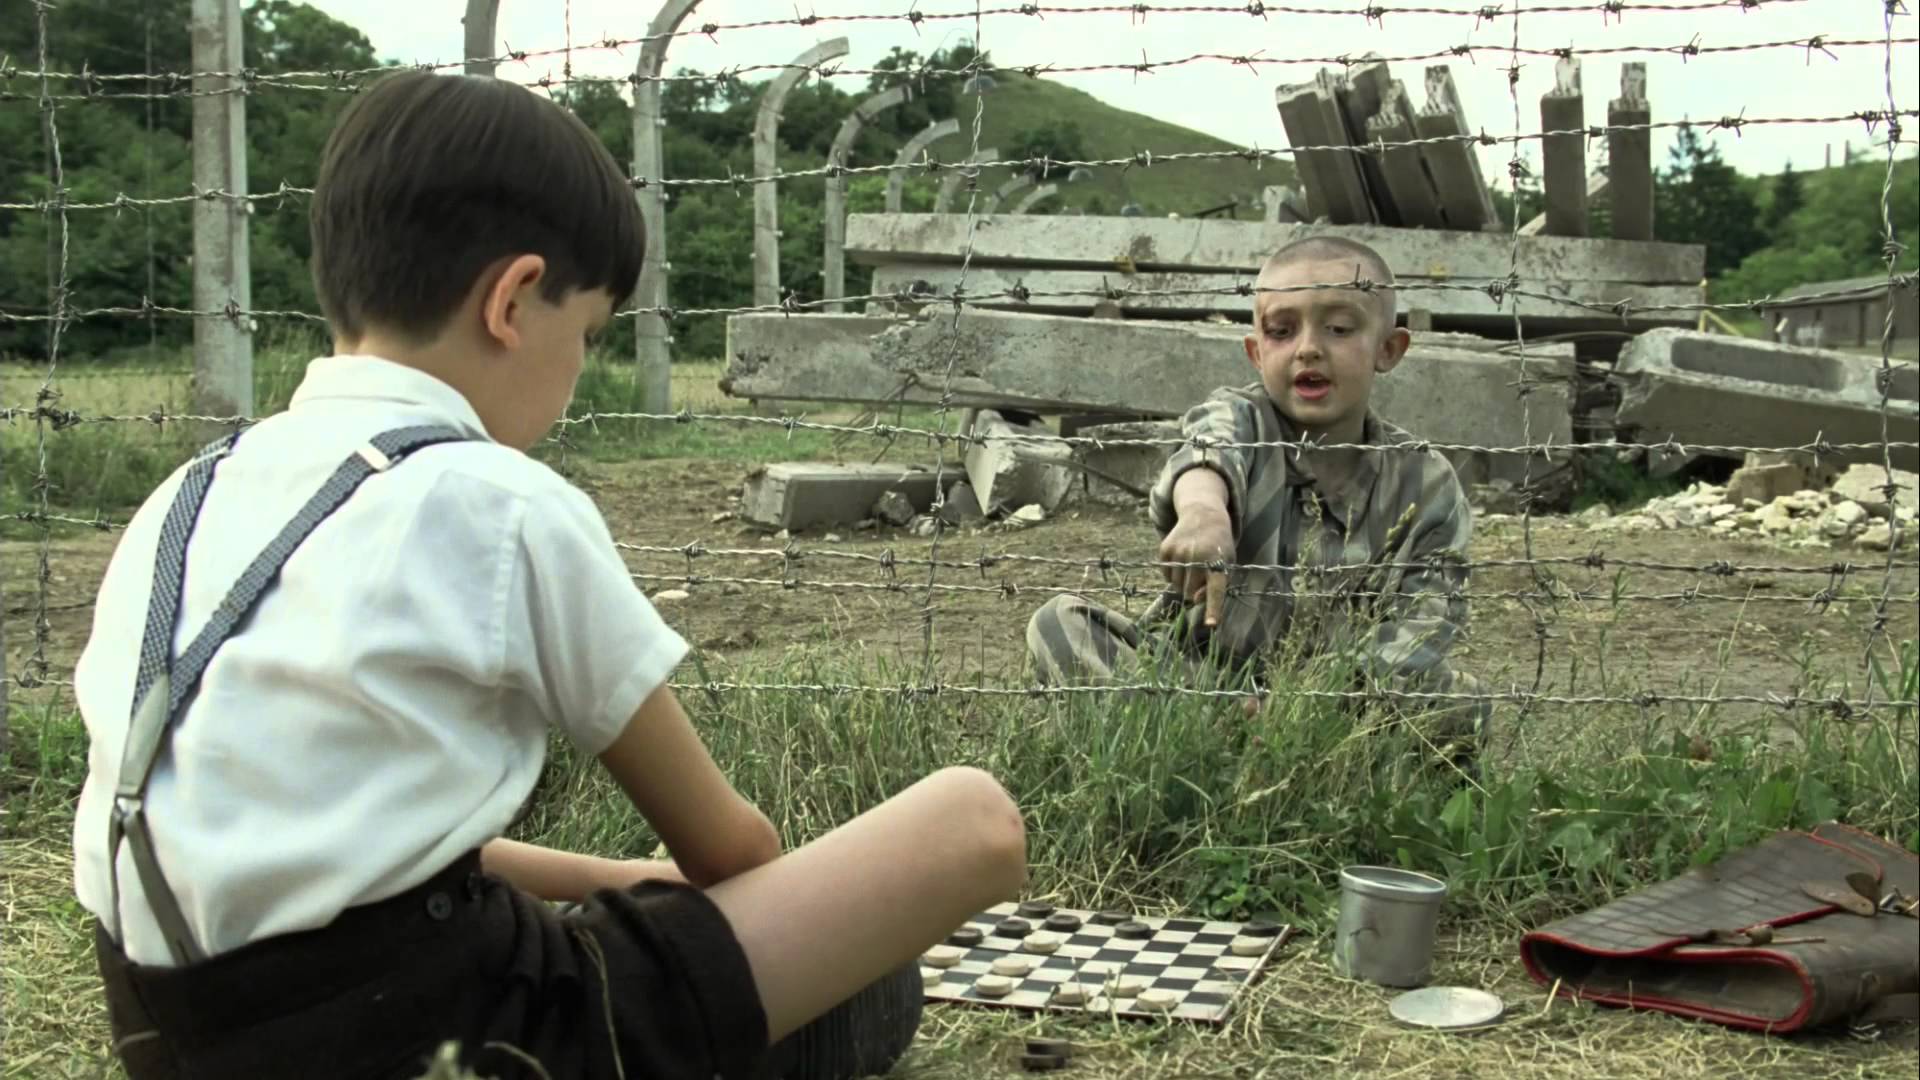 movie review of the boy in the striped pajamas